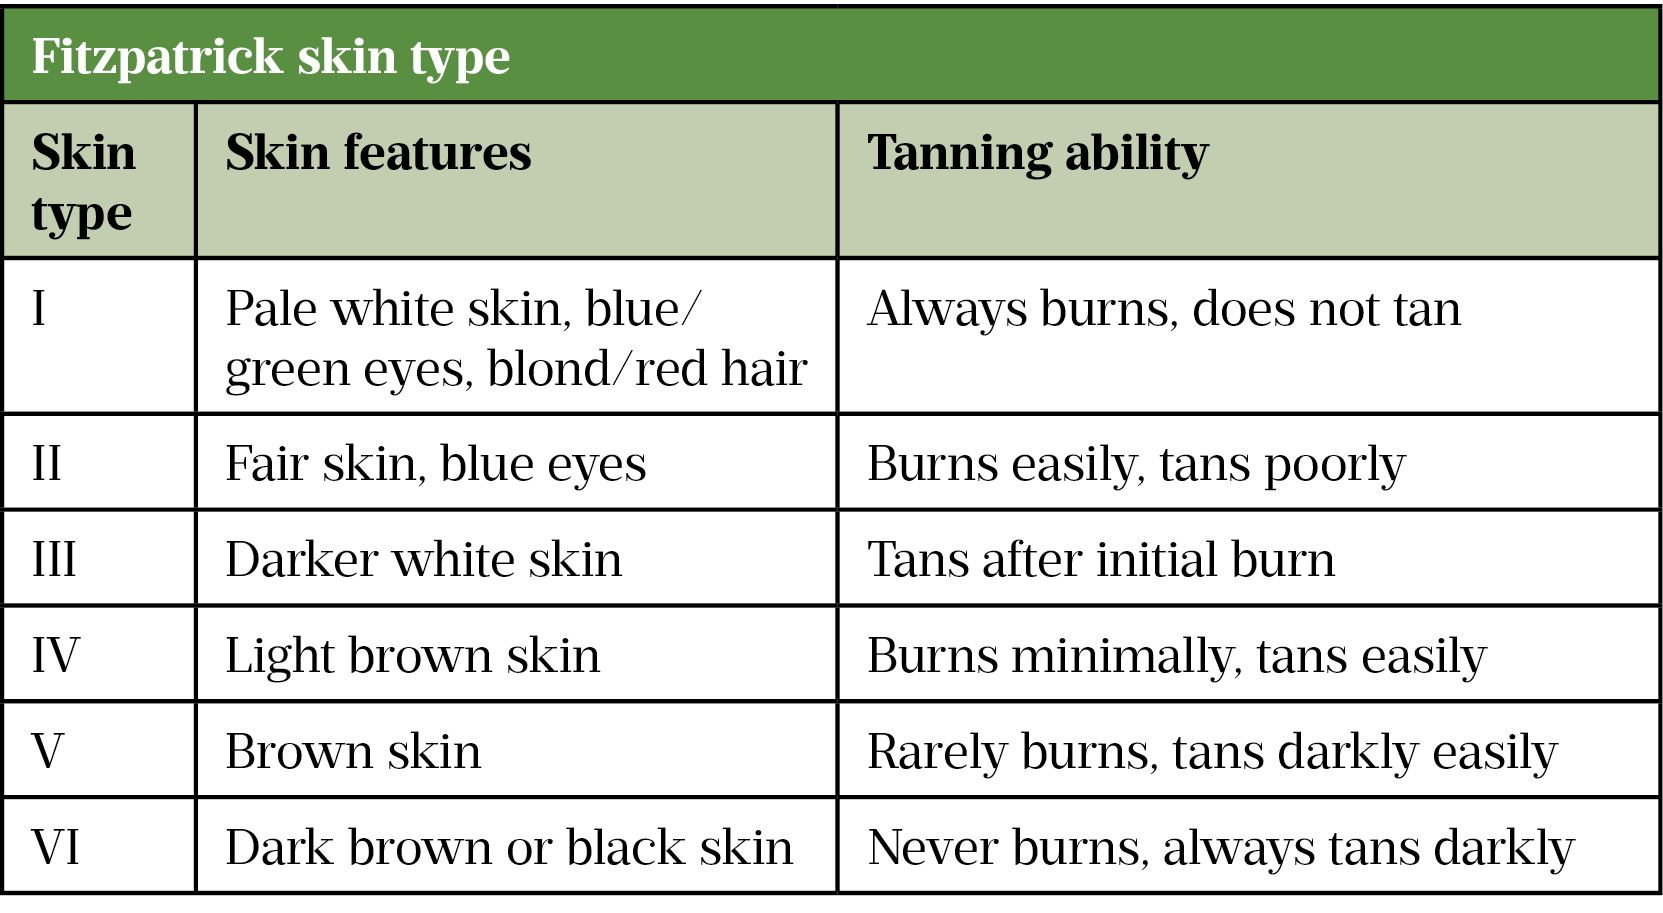 Table: The Fitzpatrick phenotype scale. A categorisation of skin type based on features and the skin’s response to sun exposure 